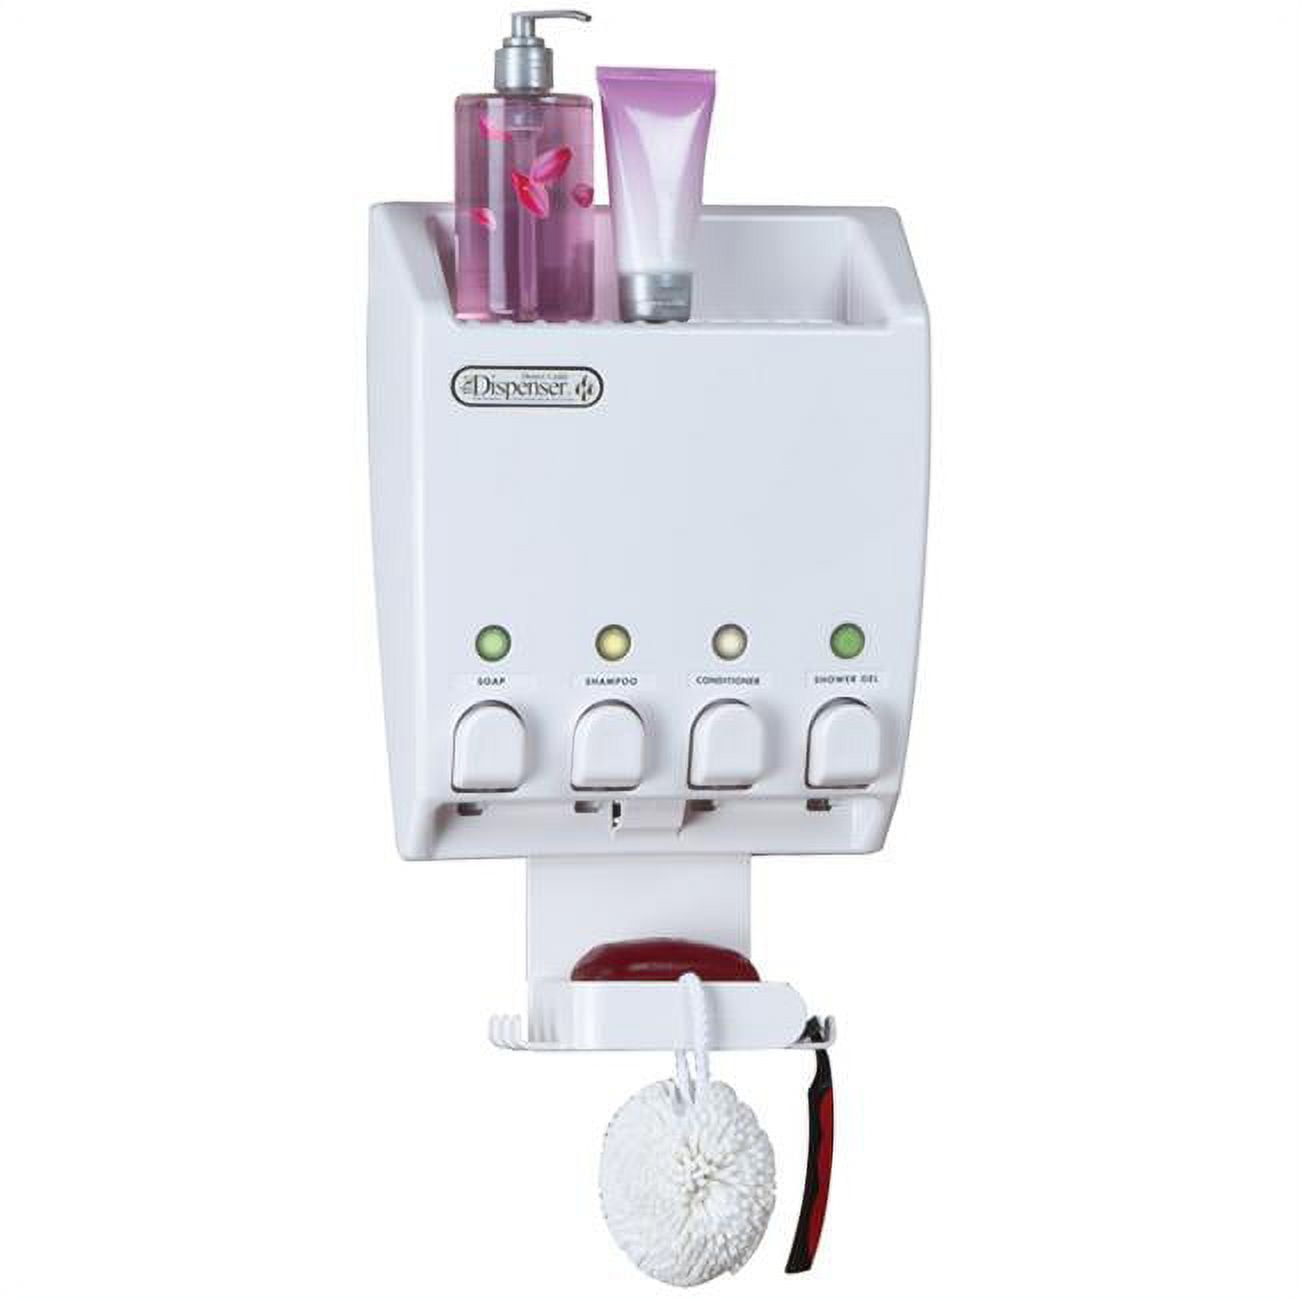 vedtage etikette Mispend Better Living Products 75453 ULTI-MATE 4 Chamber Shower Dispenser with  Shower Caddy White - Walmart.com